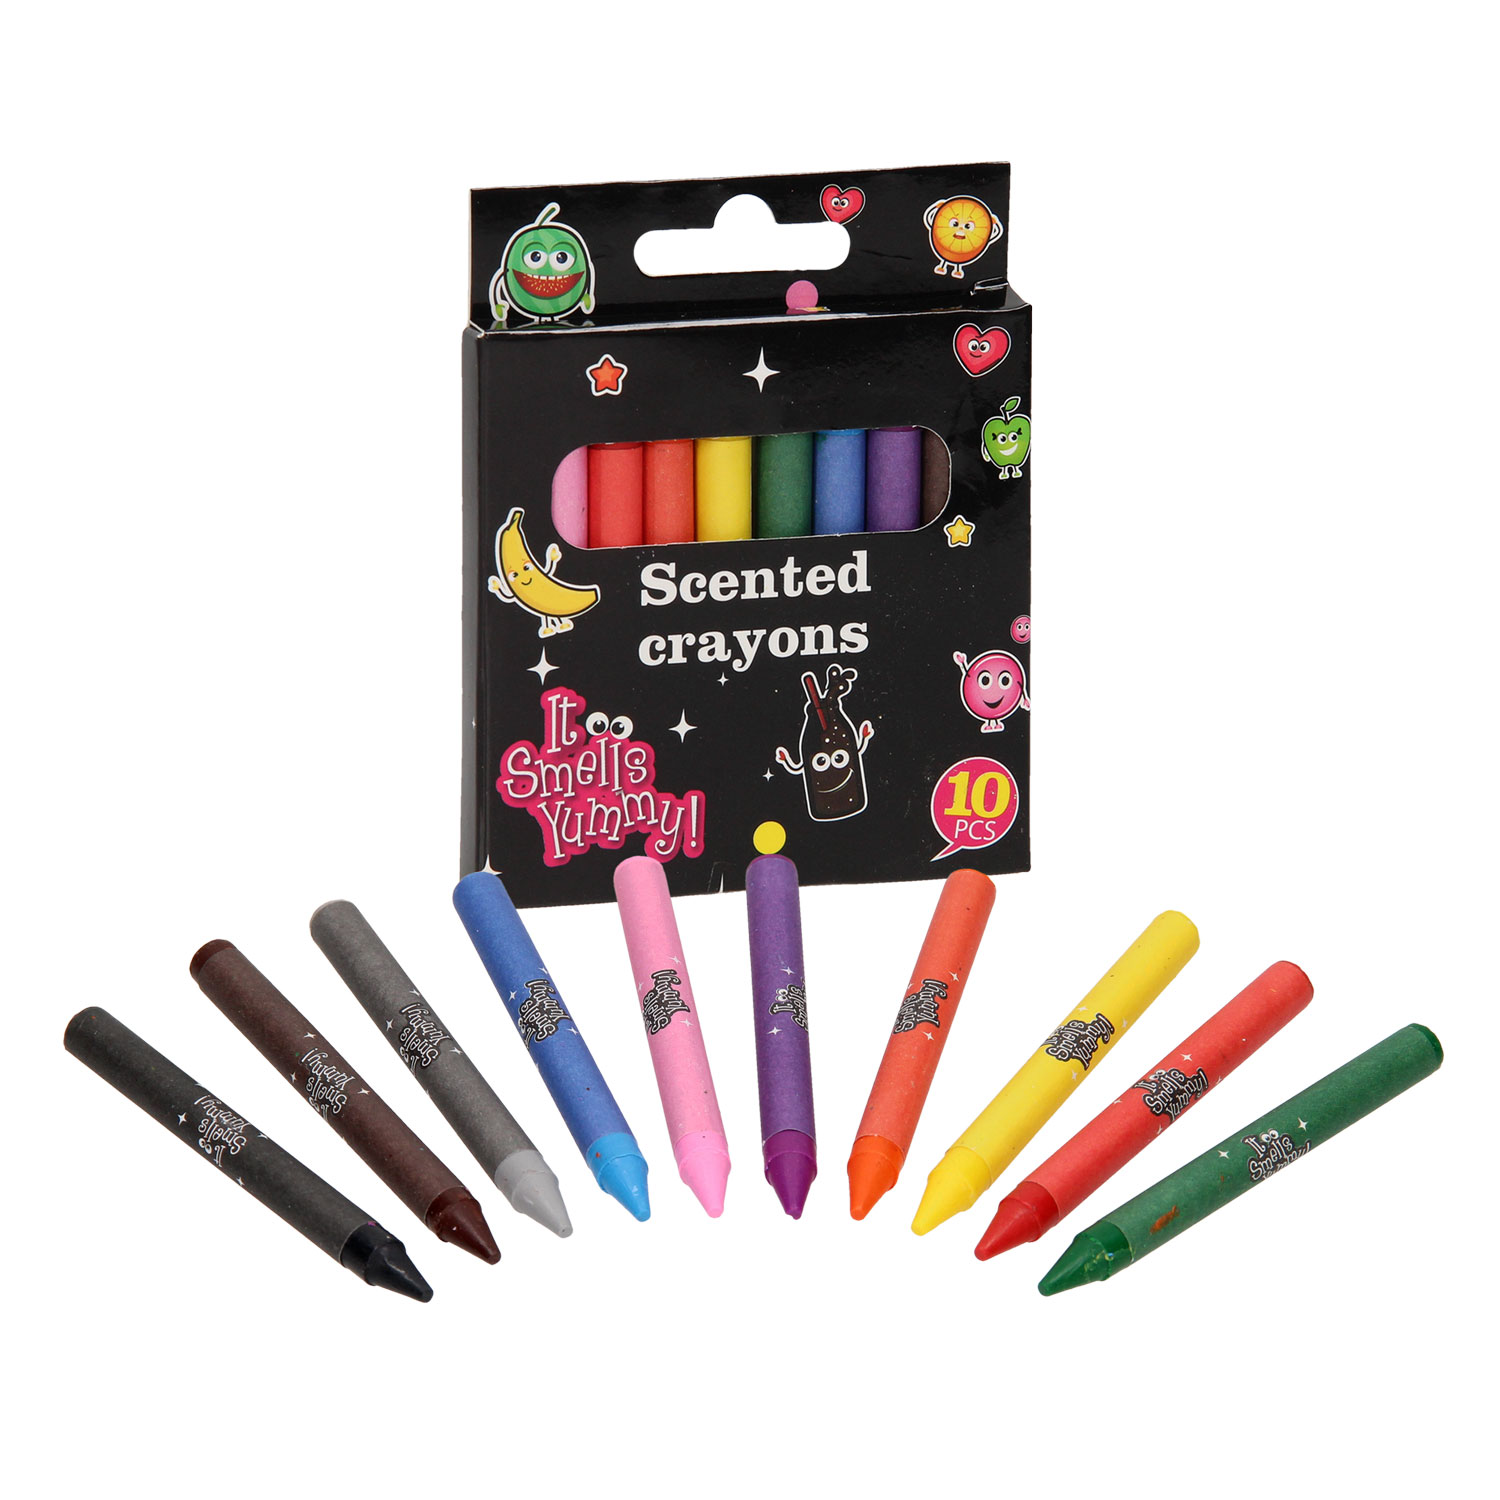 Wax Crayons with Fragrance, 10pcs.